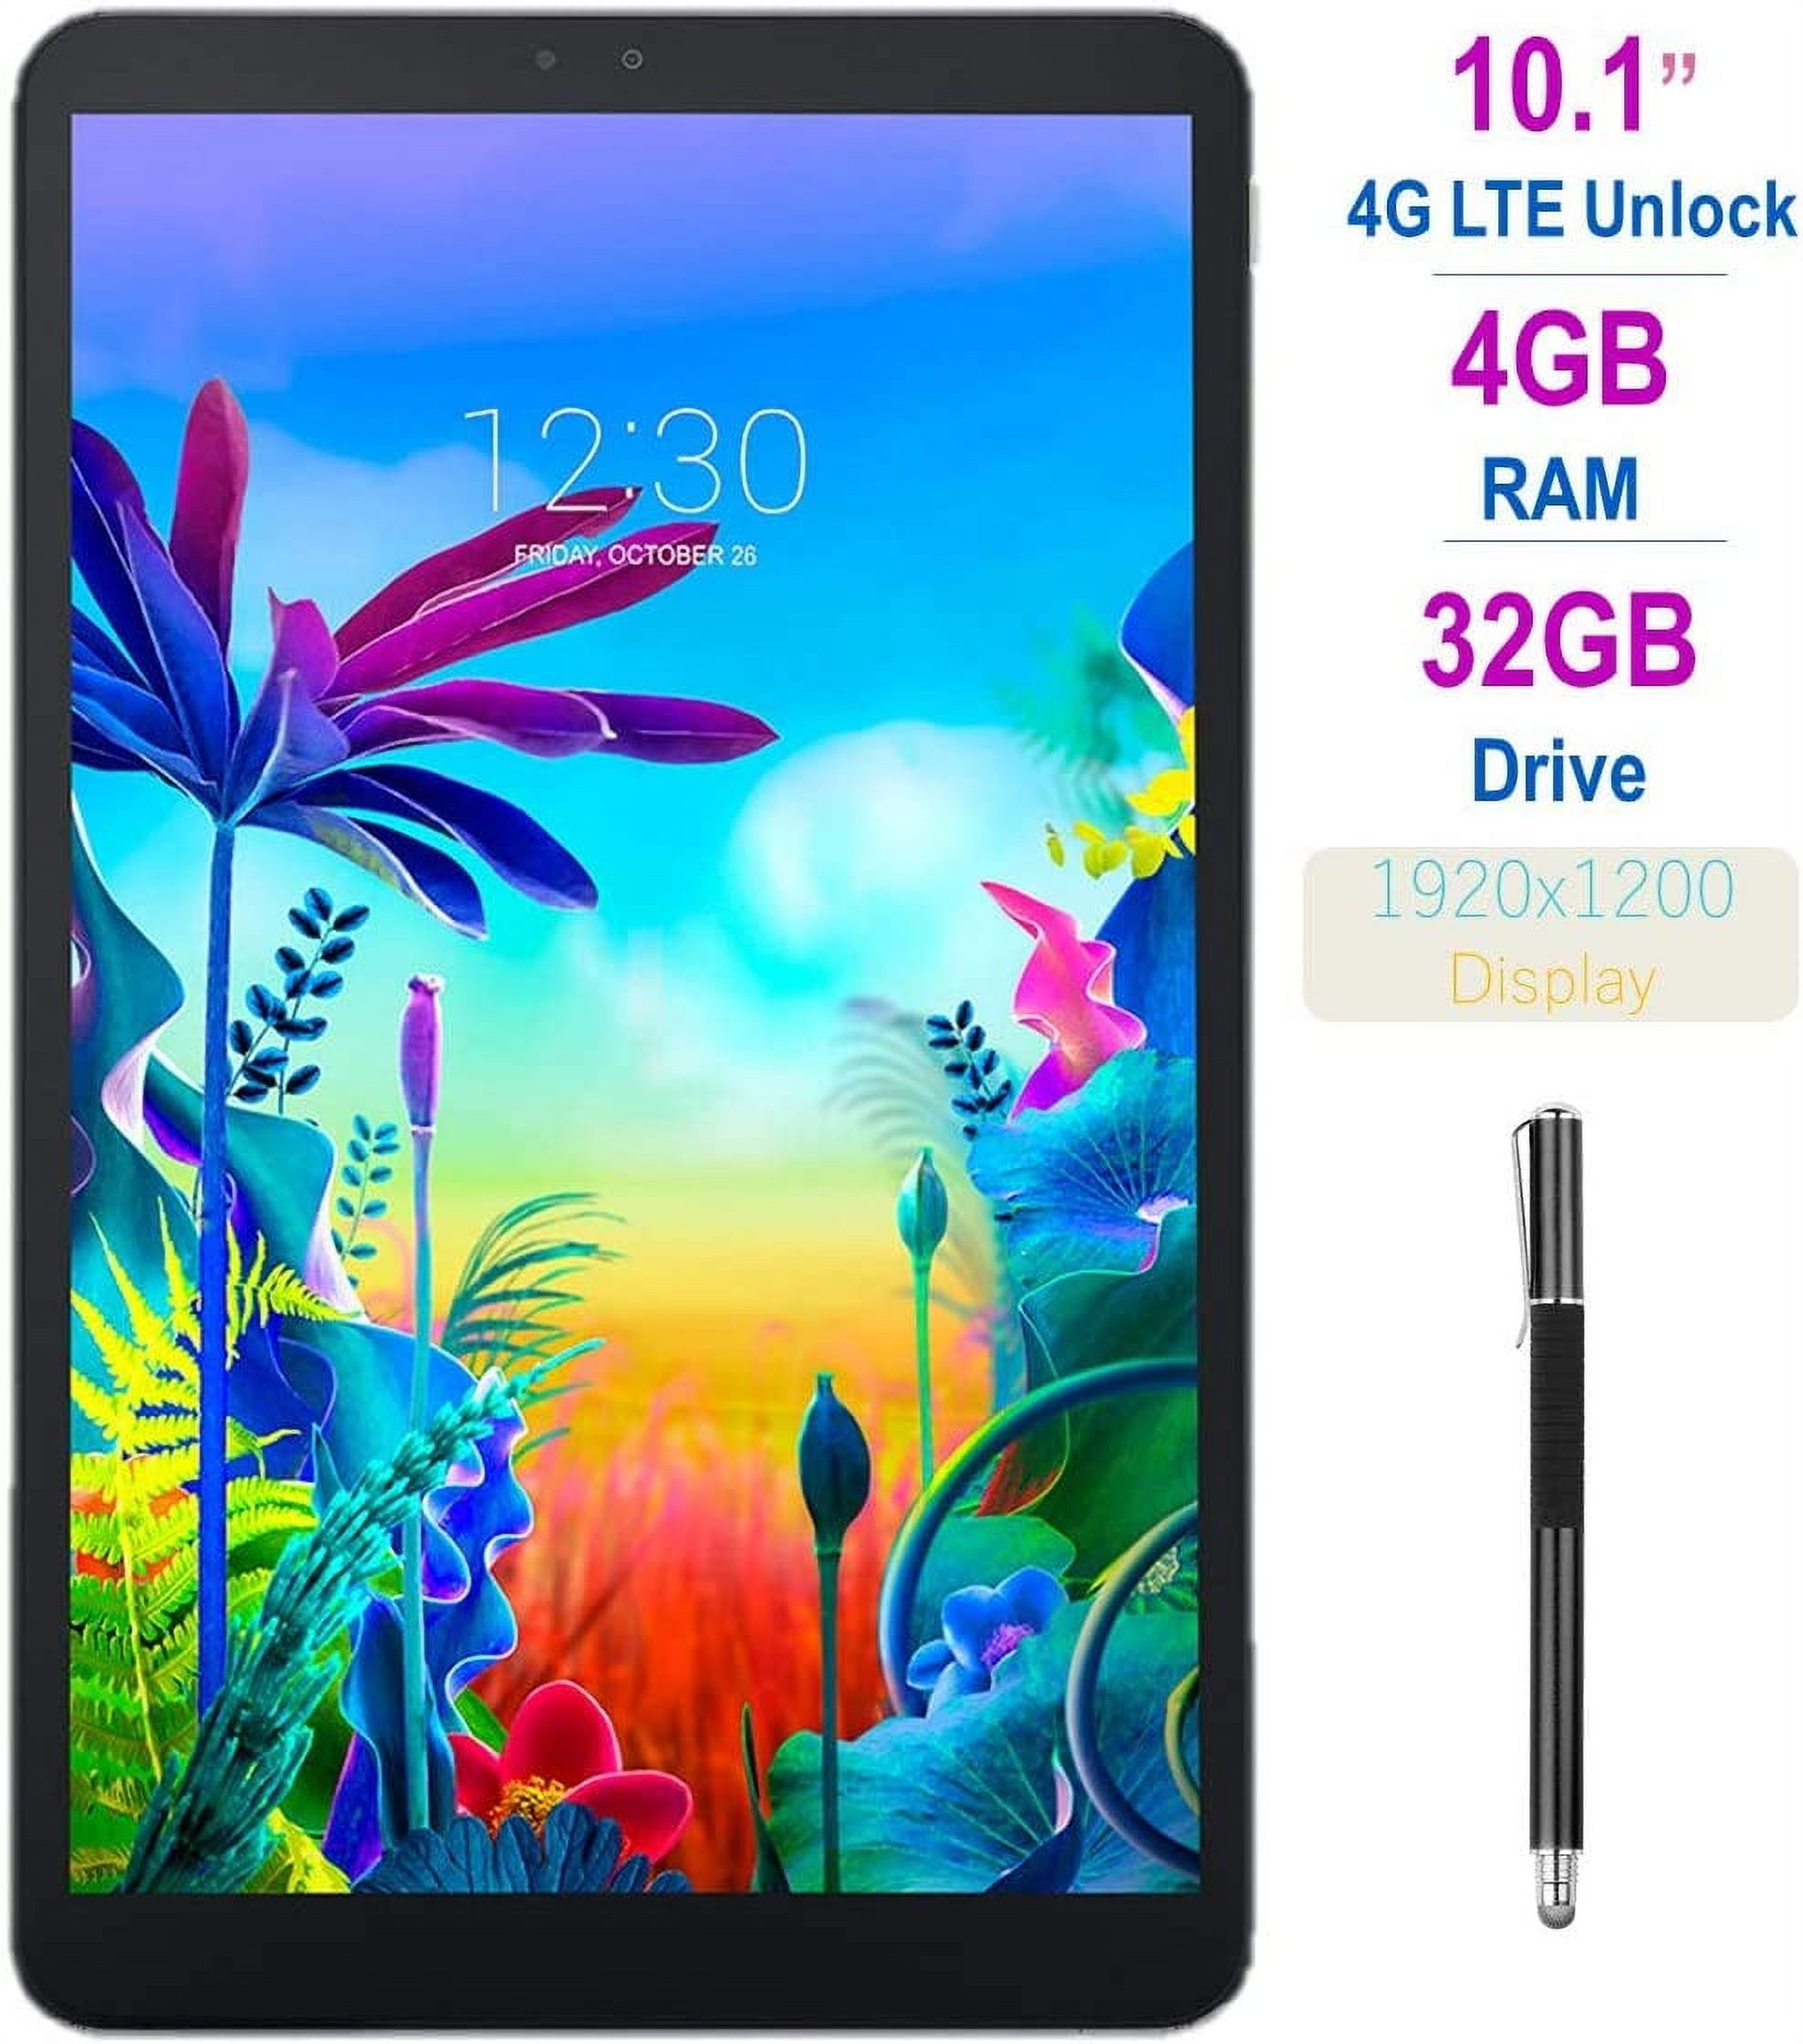 Used LG G Pad 5 10.1-inch (1920x1200) 4GB LTE Unlocked Tablet, 4GB RAM, 32GB Storage, Fingerprint, Android 9.0 w/ Mazepoly 2 in 1 Stylus Pen - image 1 of 9